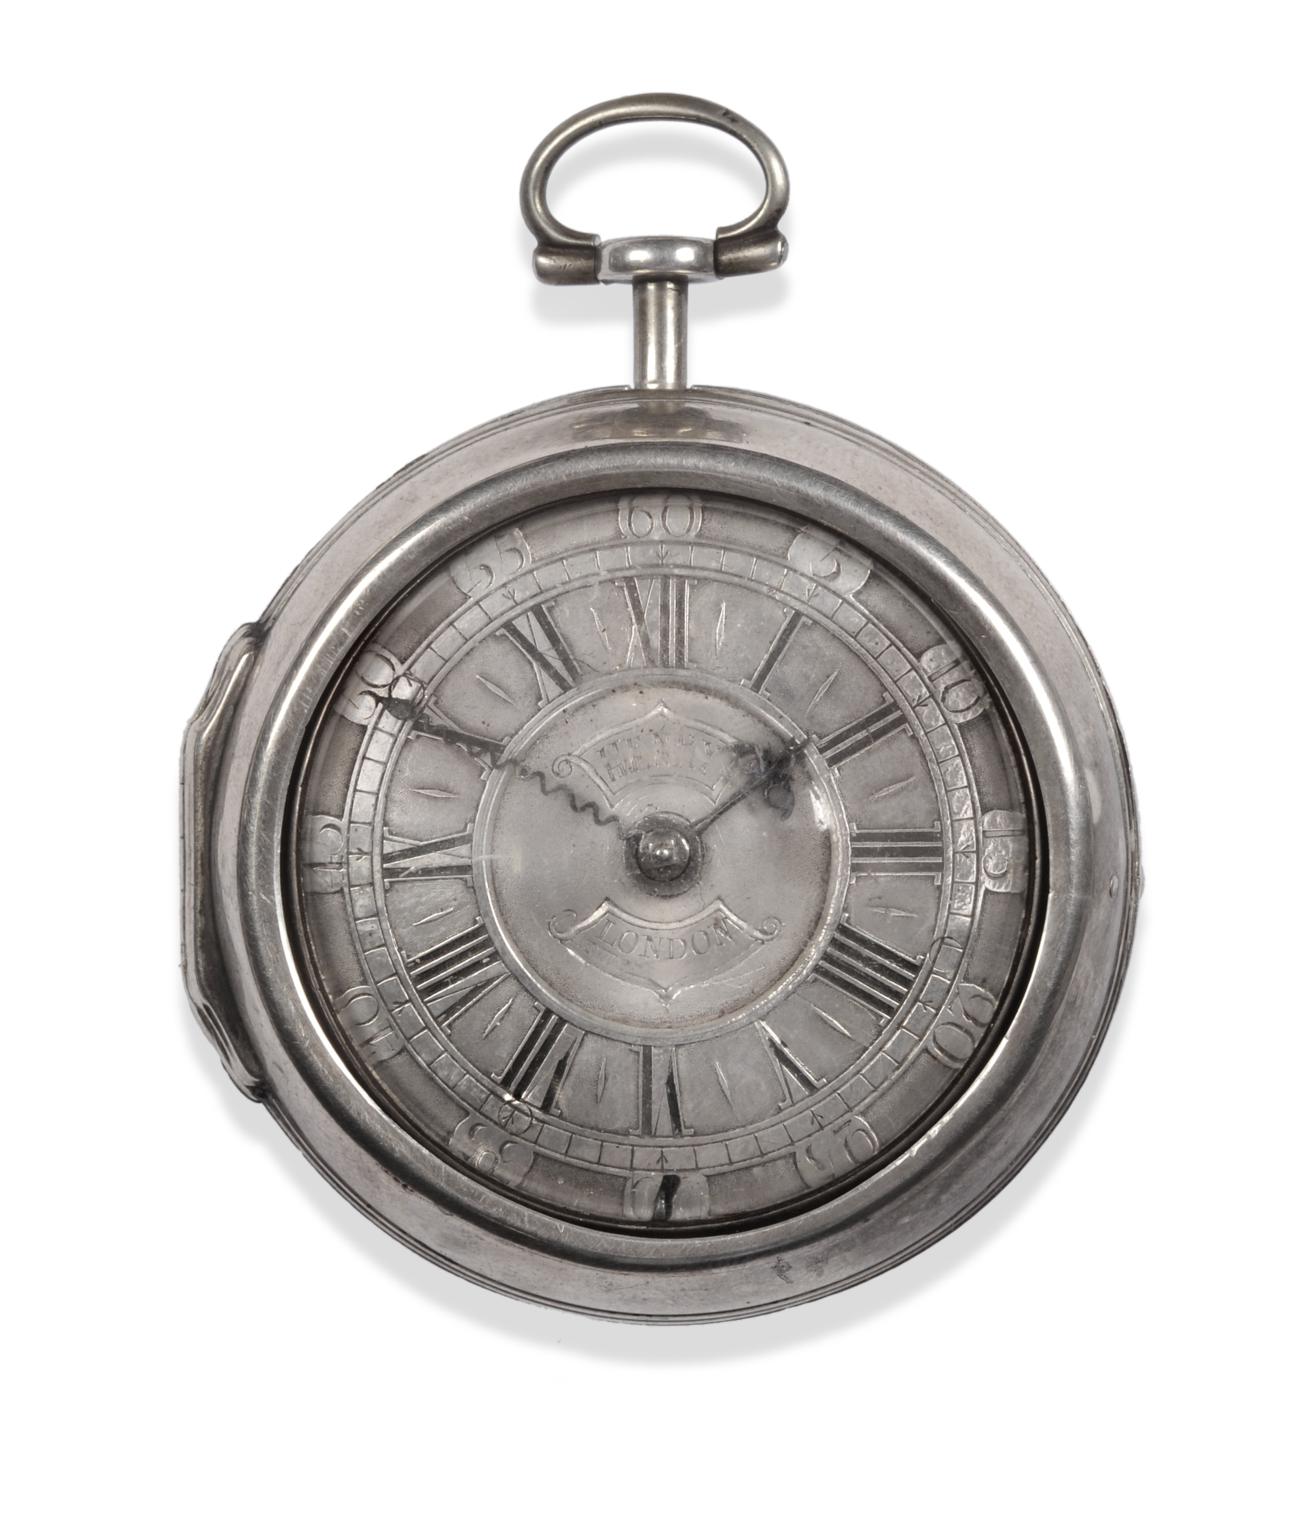 A Silver Pair Cased Verge Pocket Watch, signed Pr Henry, London, No.213, circa 1750, gilt fusee